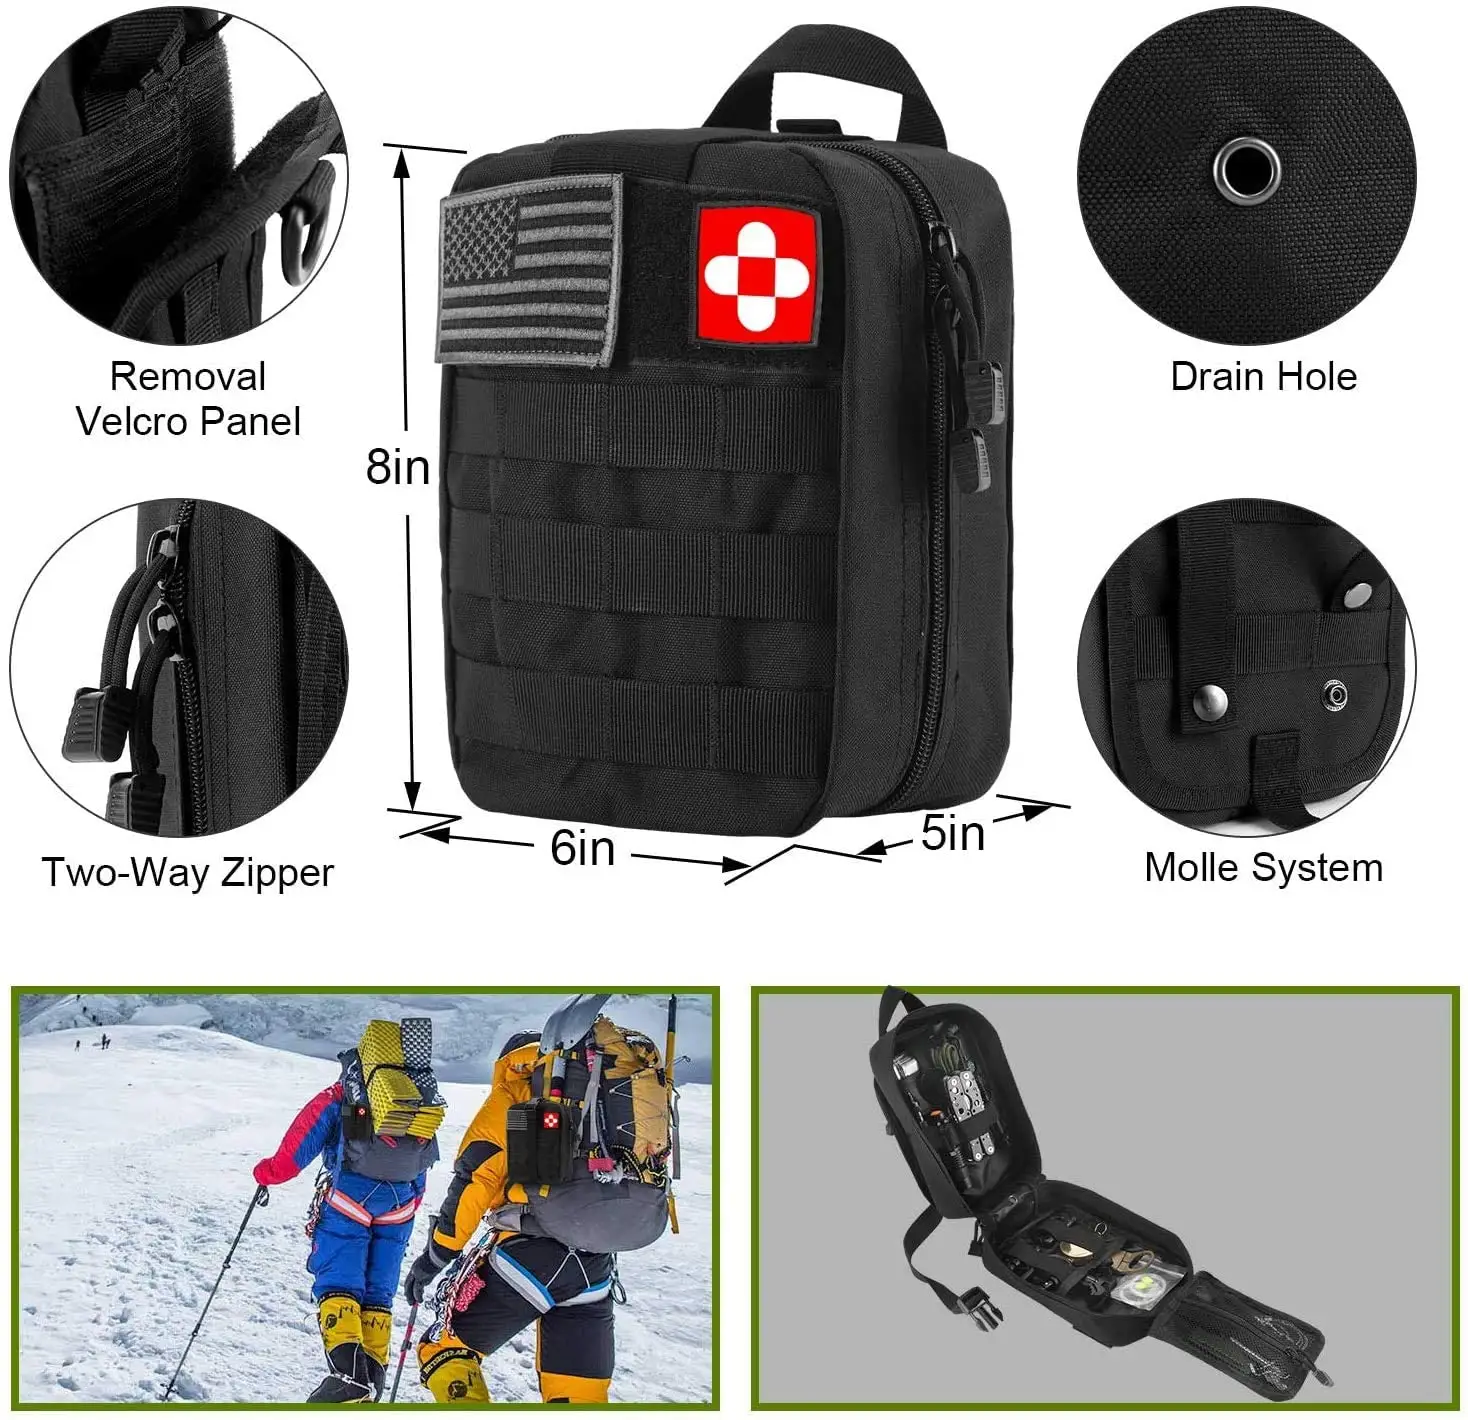 250Pcs Survival Gear First Aid Kit with Molle System Compatible Bag  Emergency Kit for Earthquake  Outdoor Adventure  Hiking